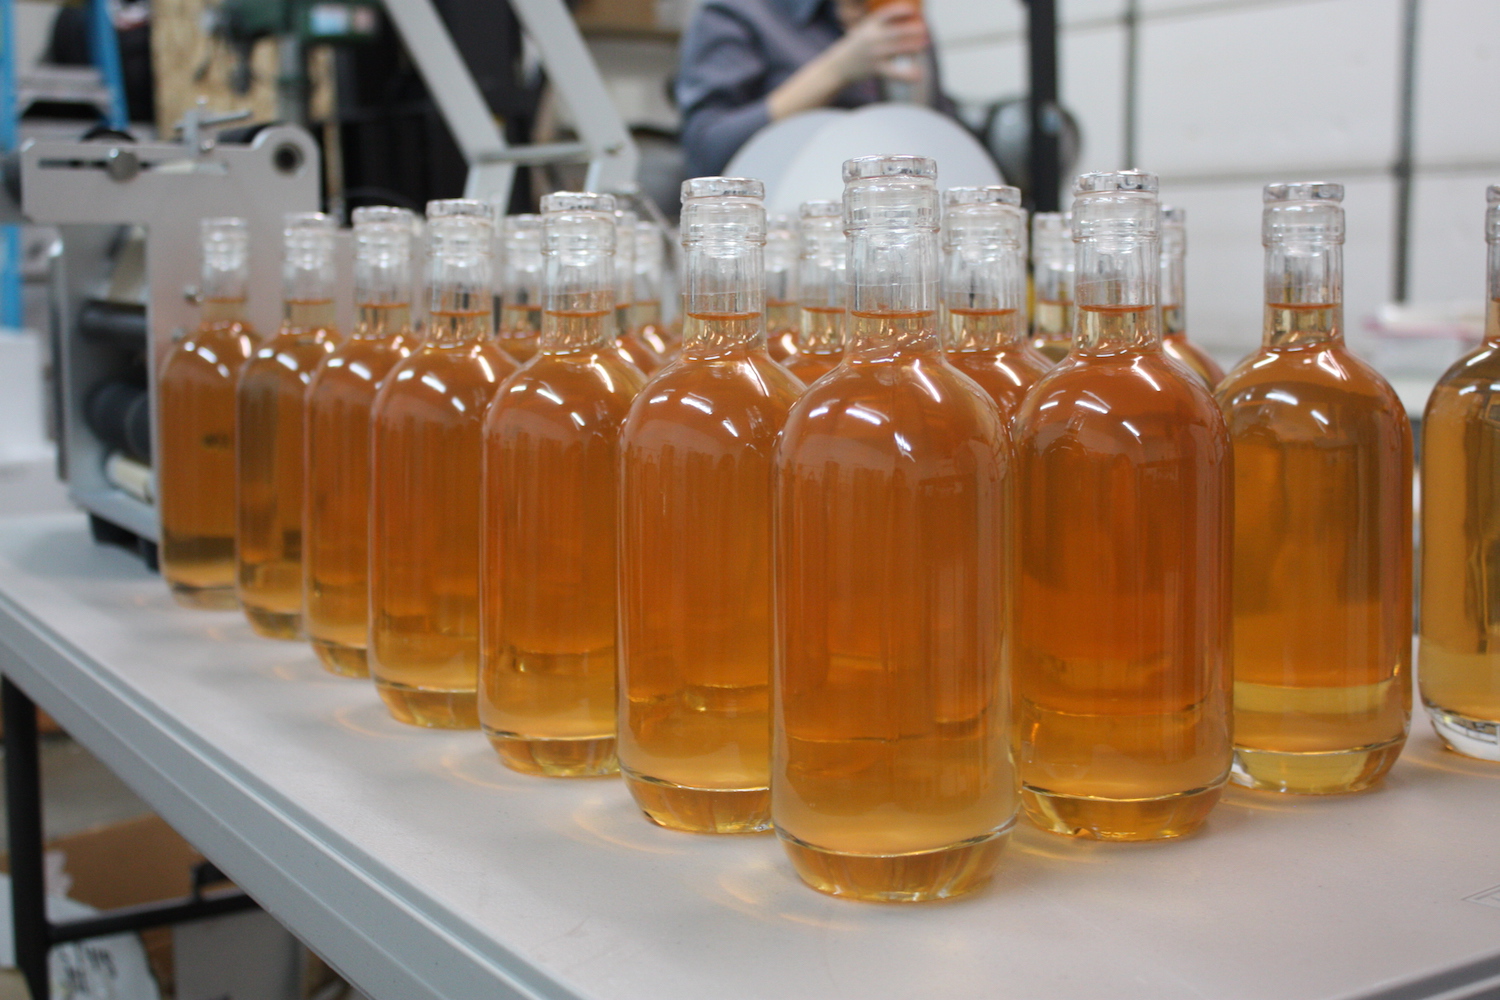 Local Idaho honey is being brewed into a medieval beverage called mead.